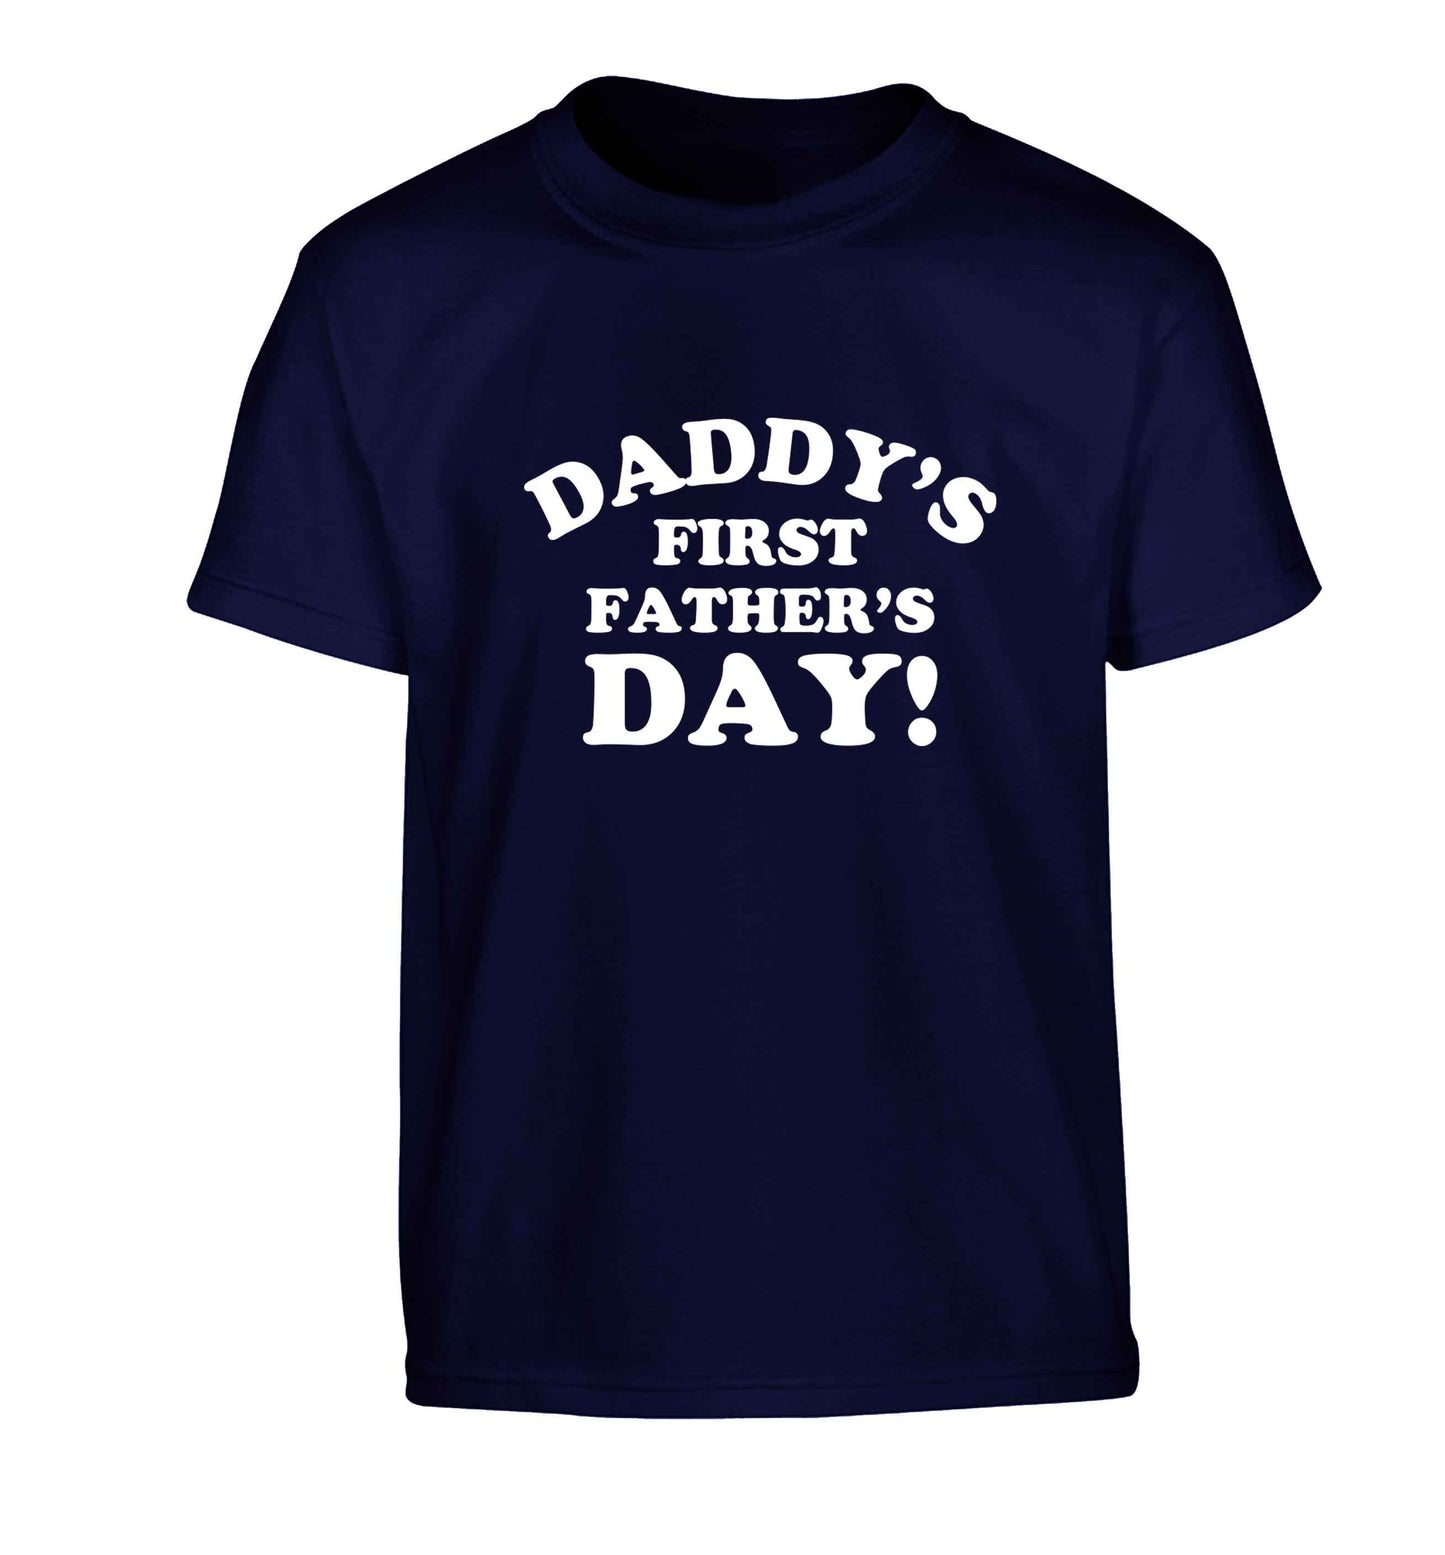 Daddy's first father's day Children's navy Tshirt 12-13 Years